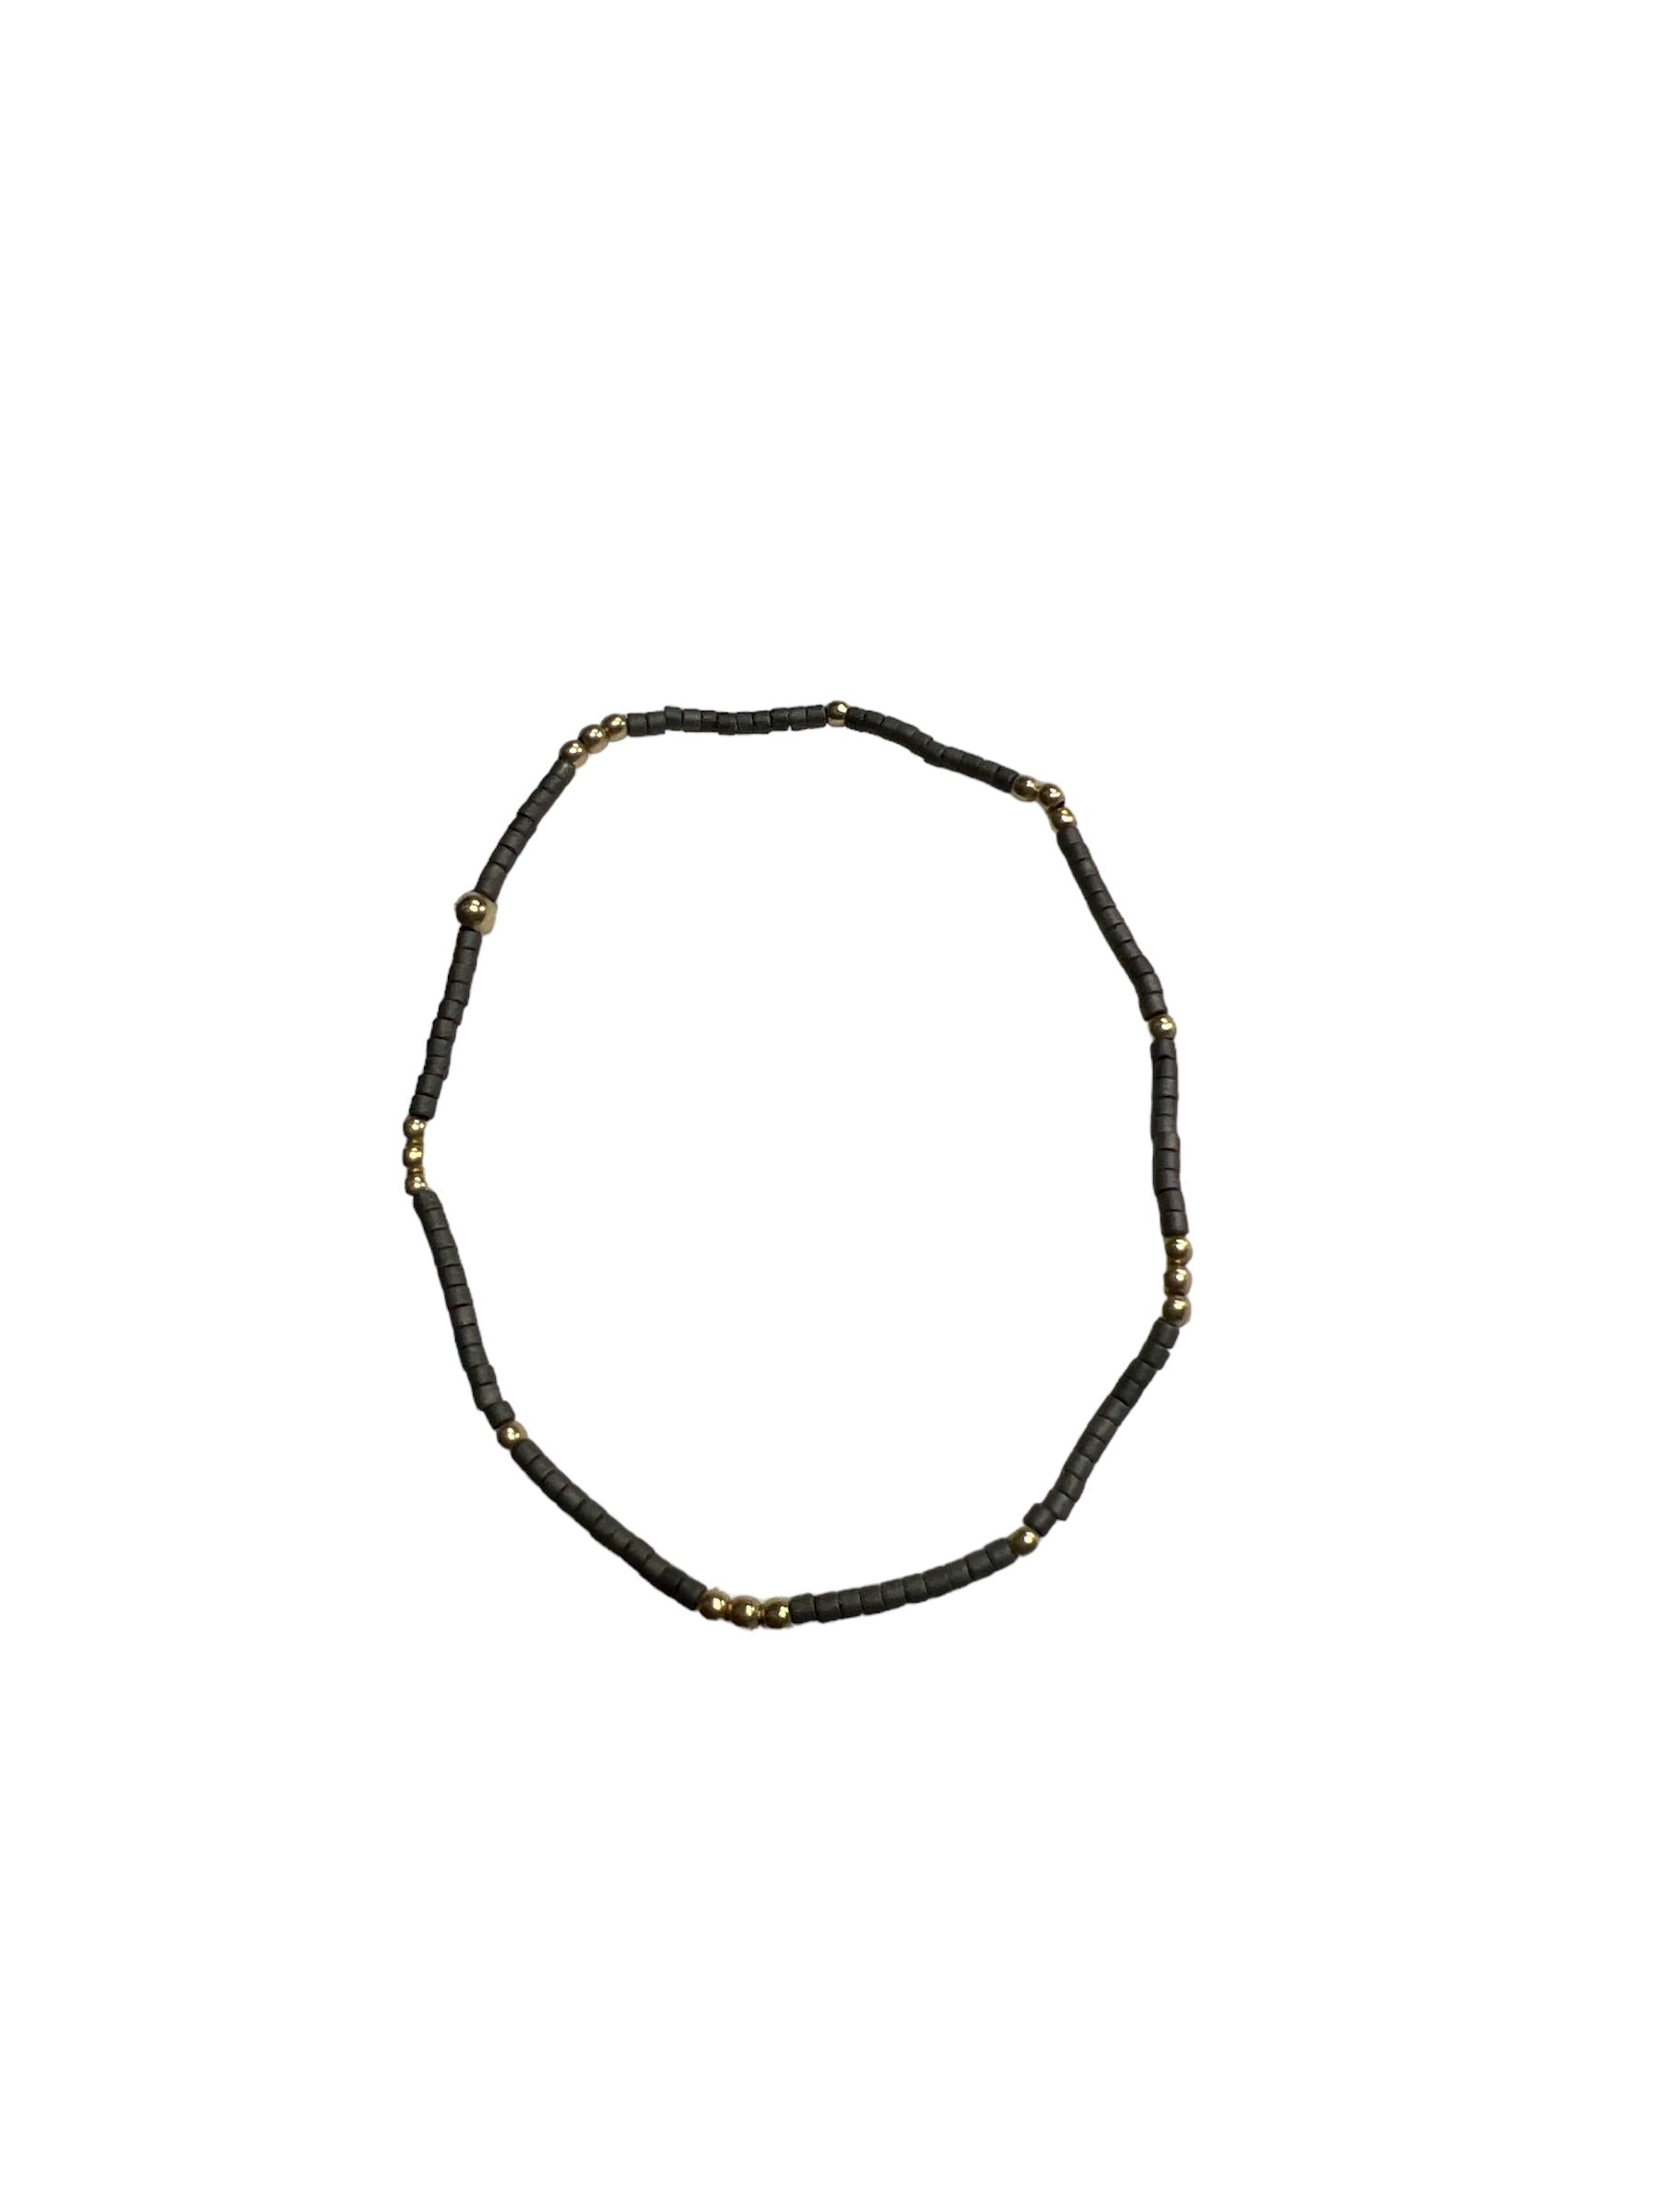 2mm Newport Graphite + Gold Filled Waterproof Bracelet-410 Jewelry-Erin Gray-Simply Stylish Boutique | Women’s & Kid’s Fashion | Paducah, KY